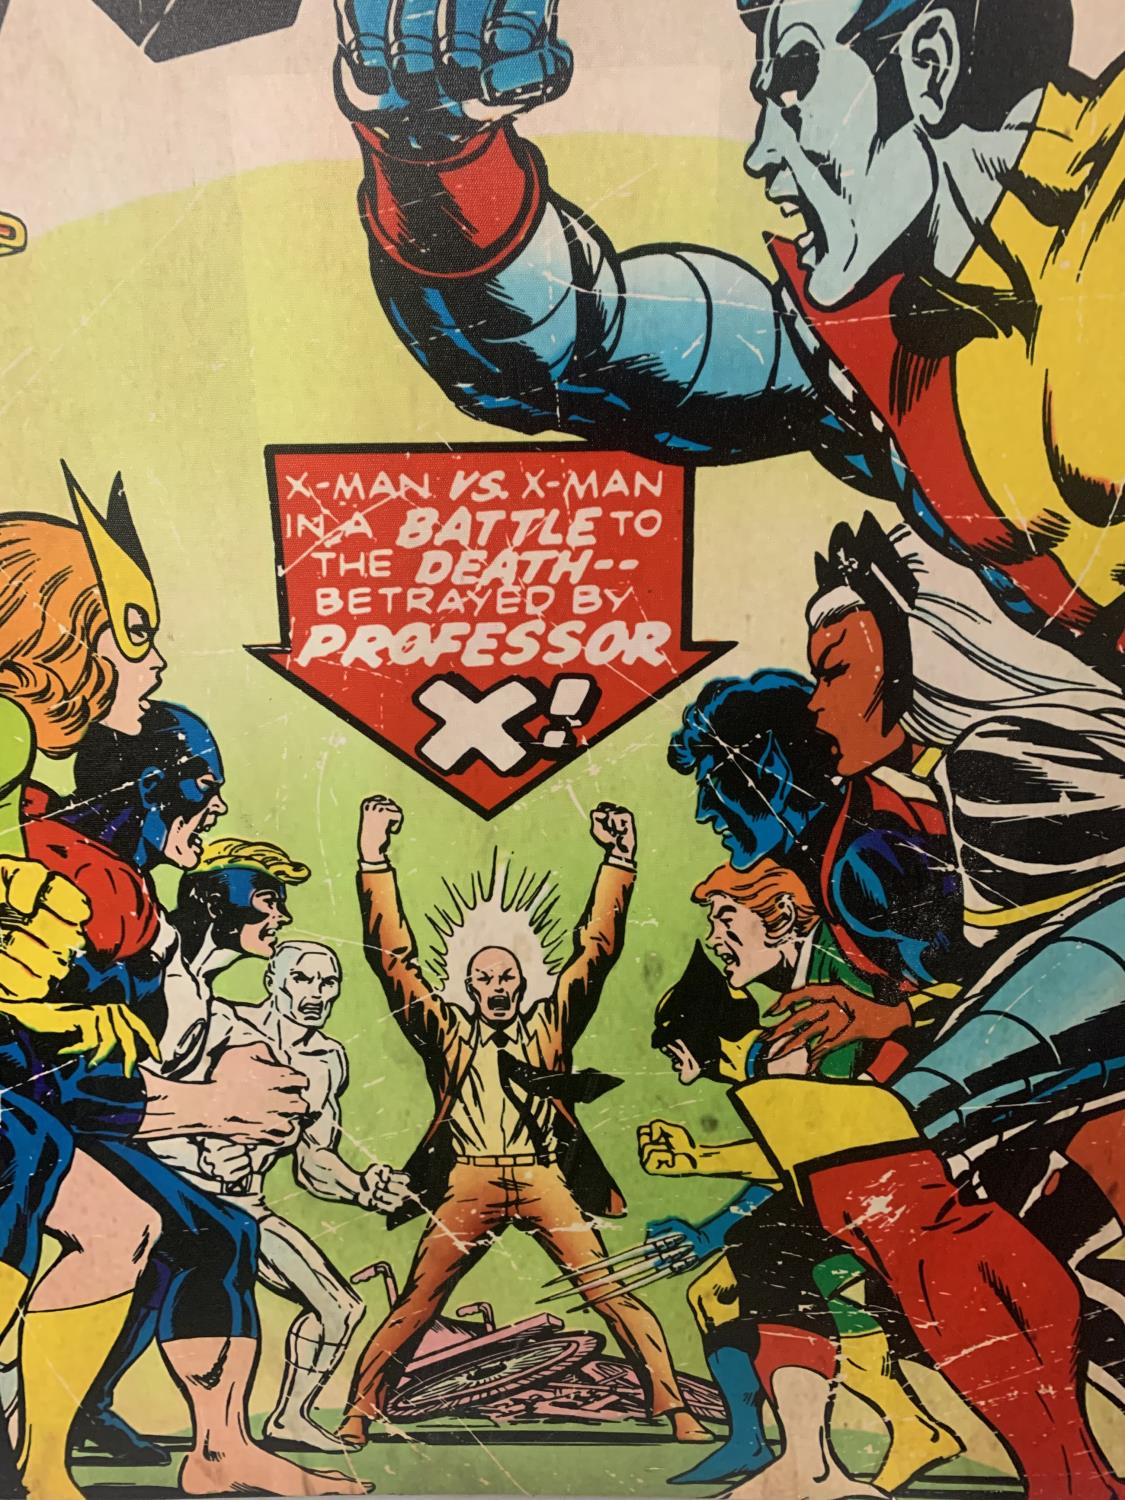 A LARGE XMEN COMIC STYLE CANVAS - Image 5 of 6